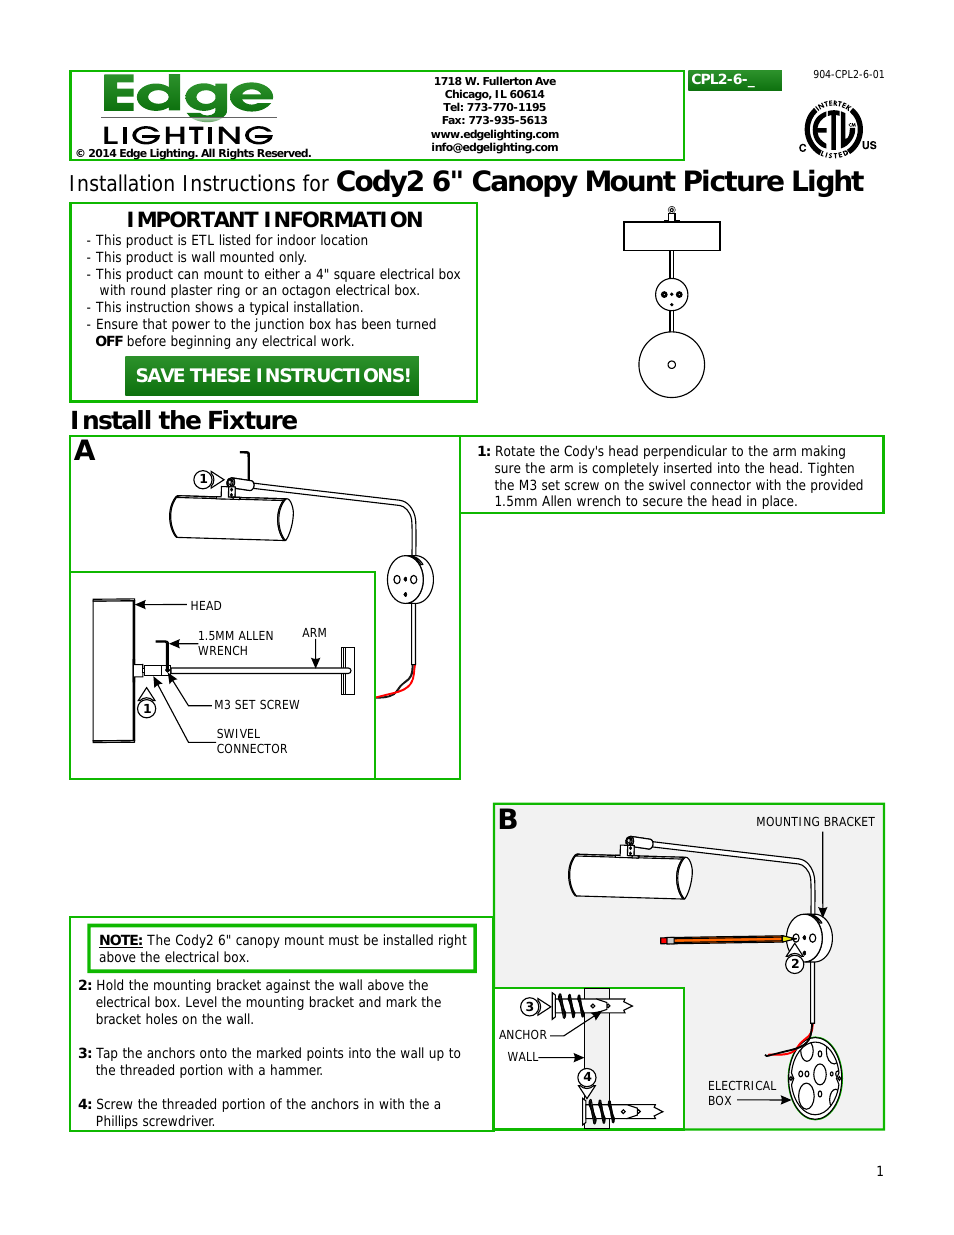 Cody 2 LED Picture Light